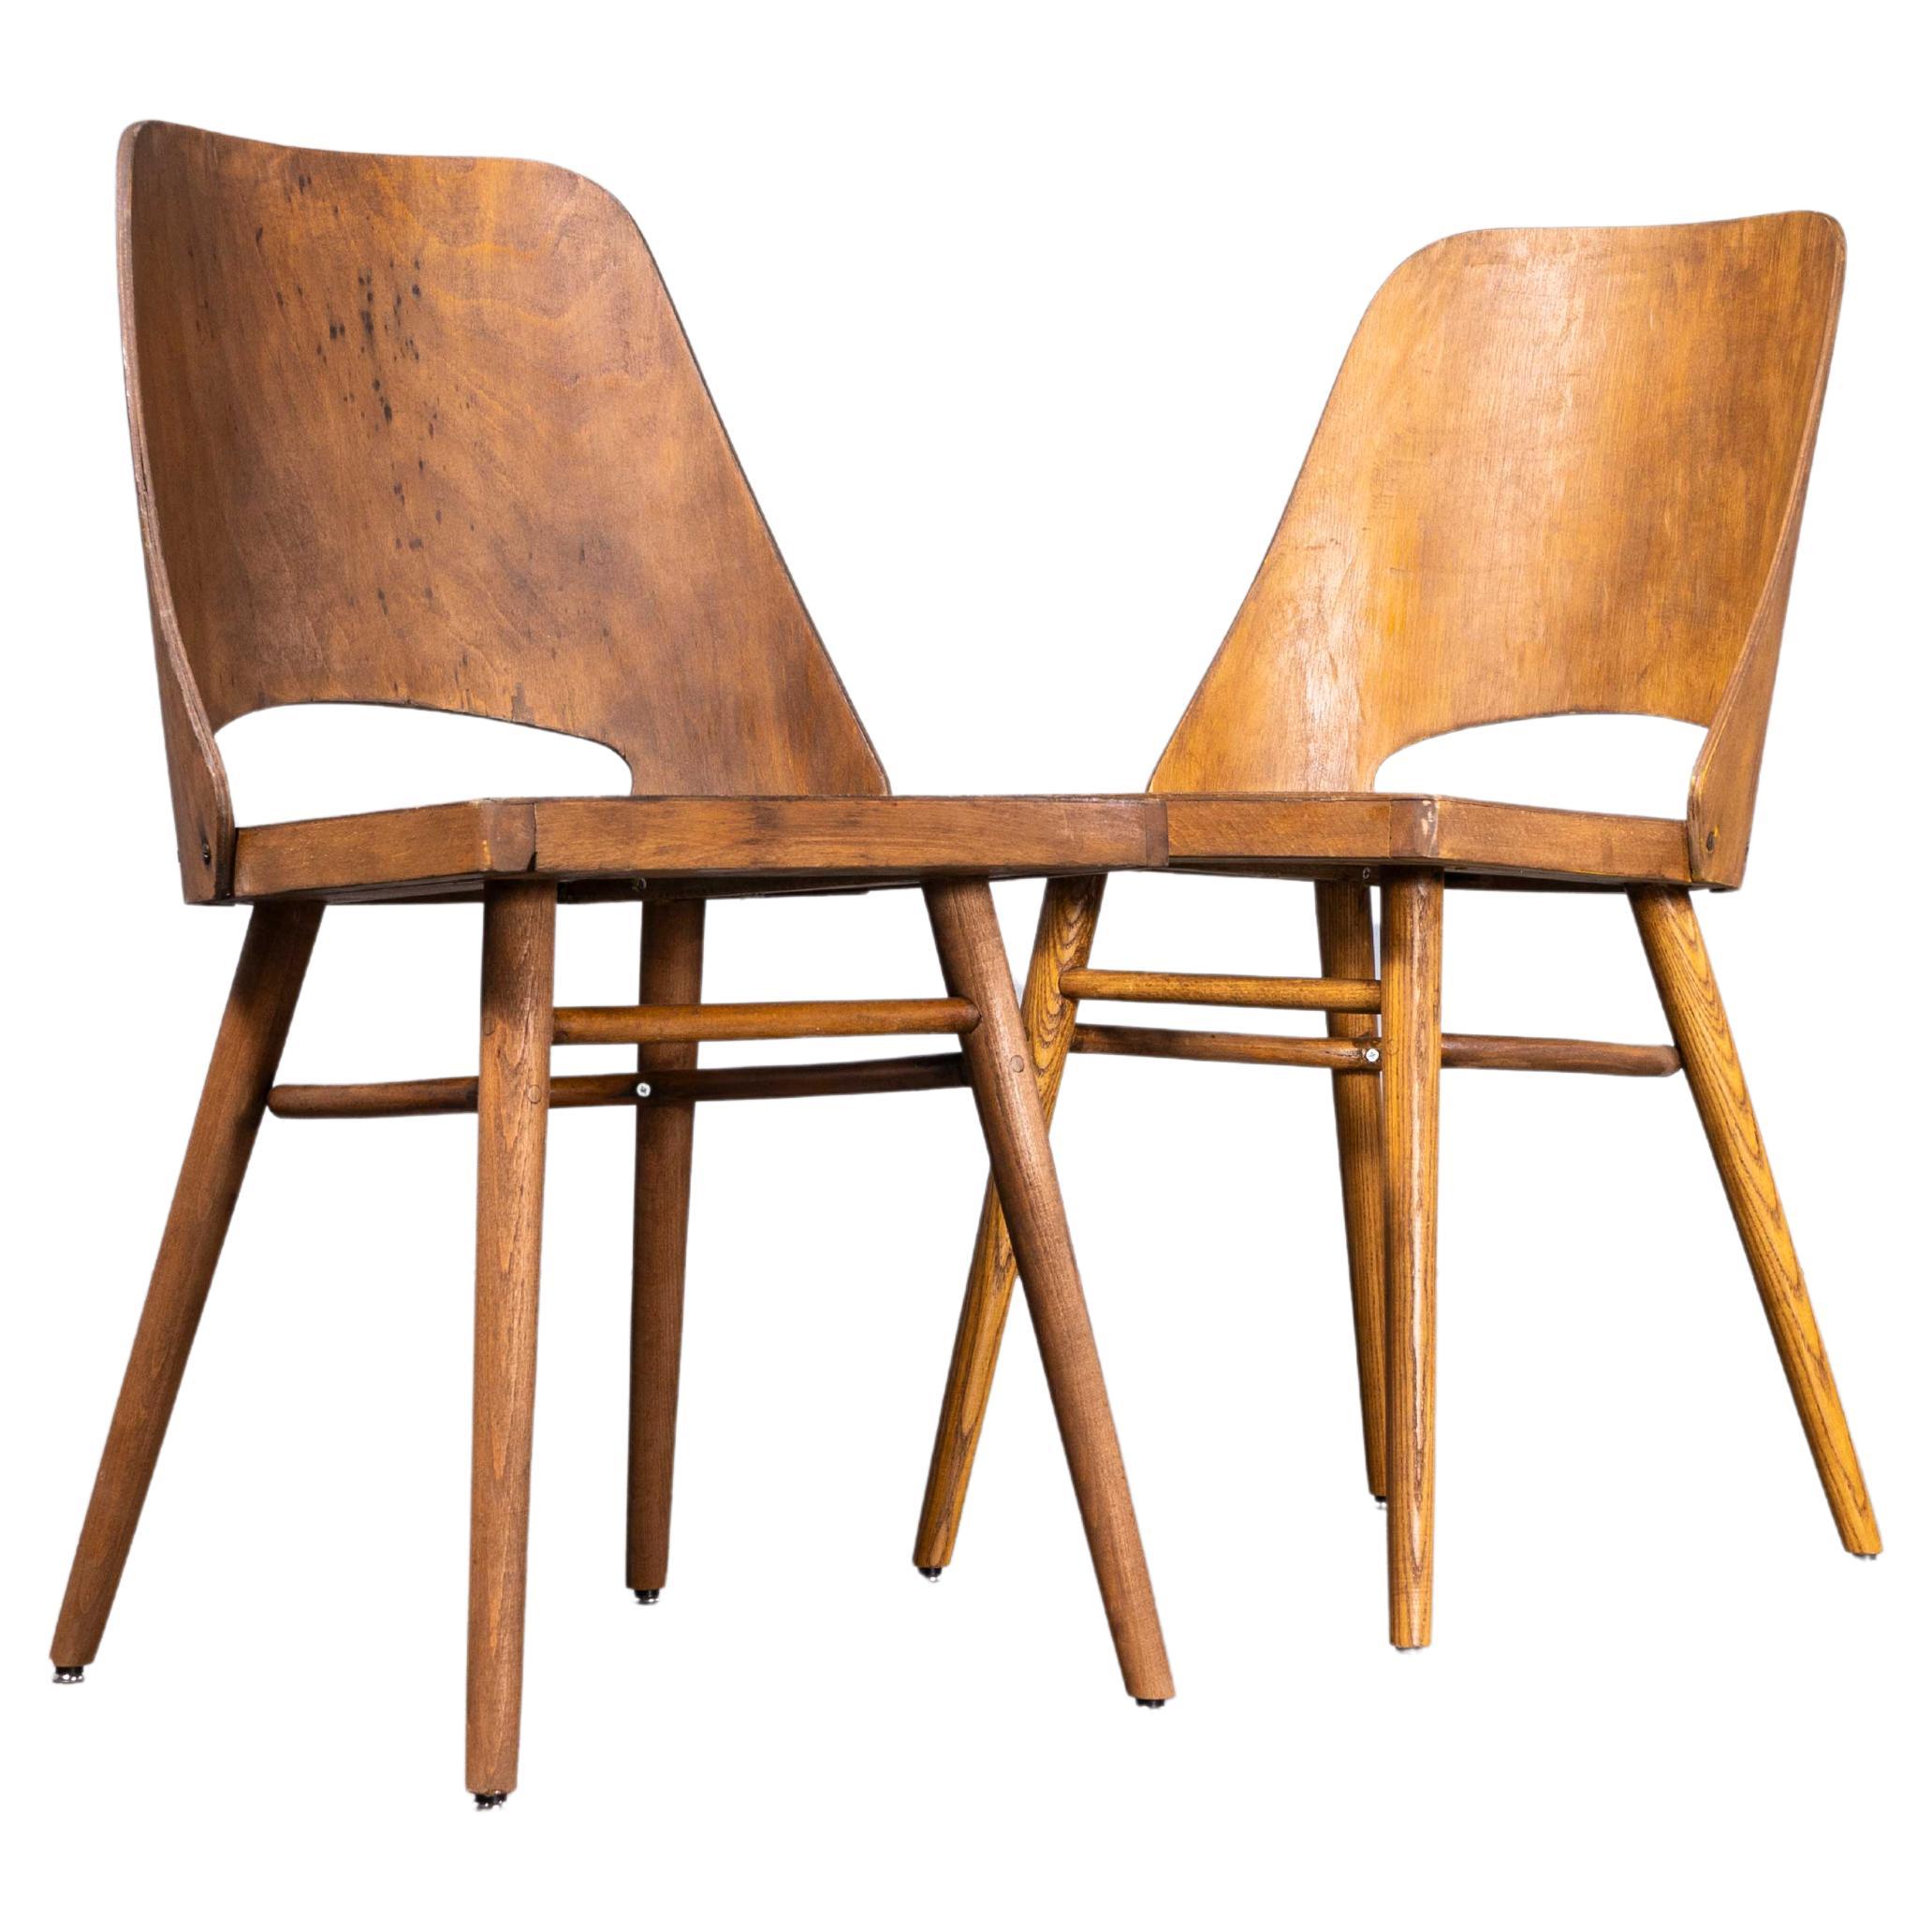 1950’s Mid Oak Dining Chairs By Radomir Hoffman For Ton – Pair For Sale